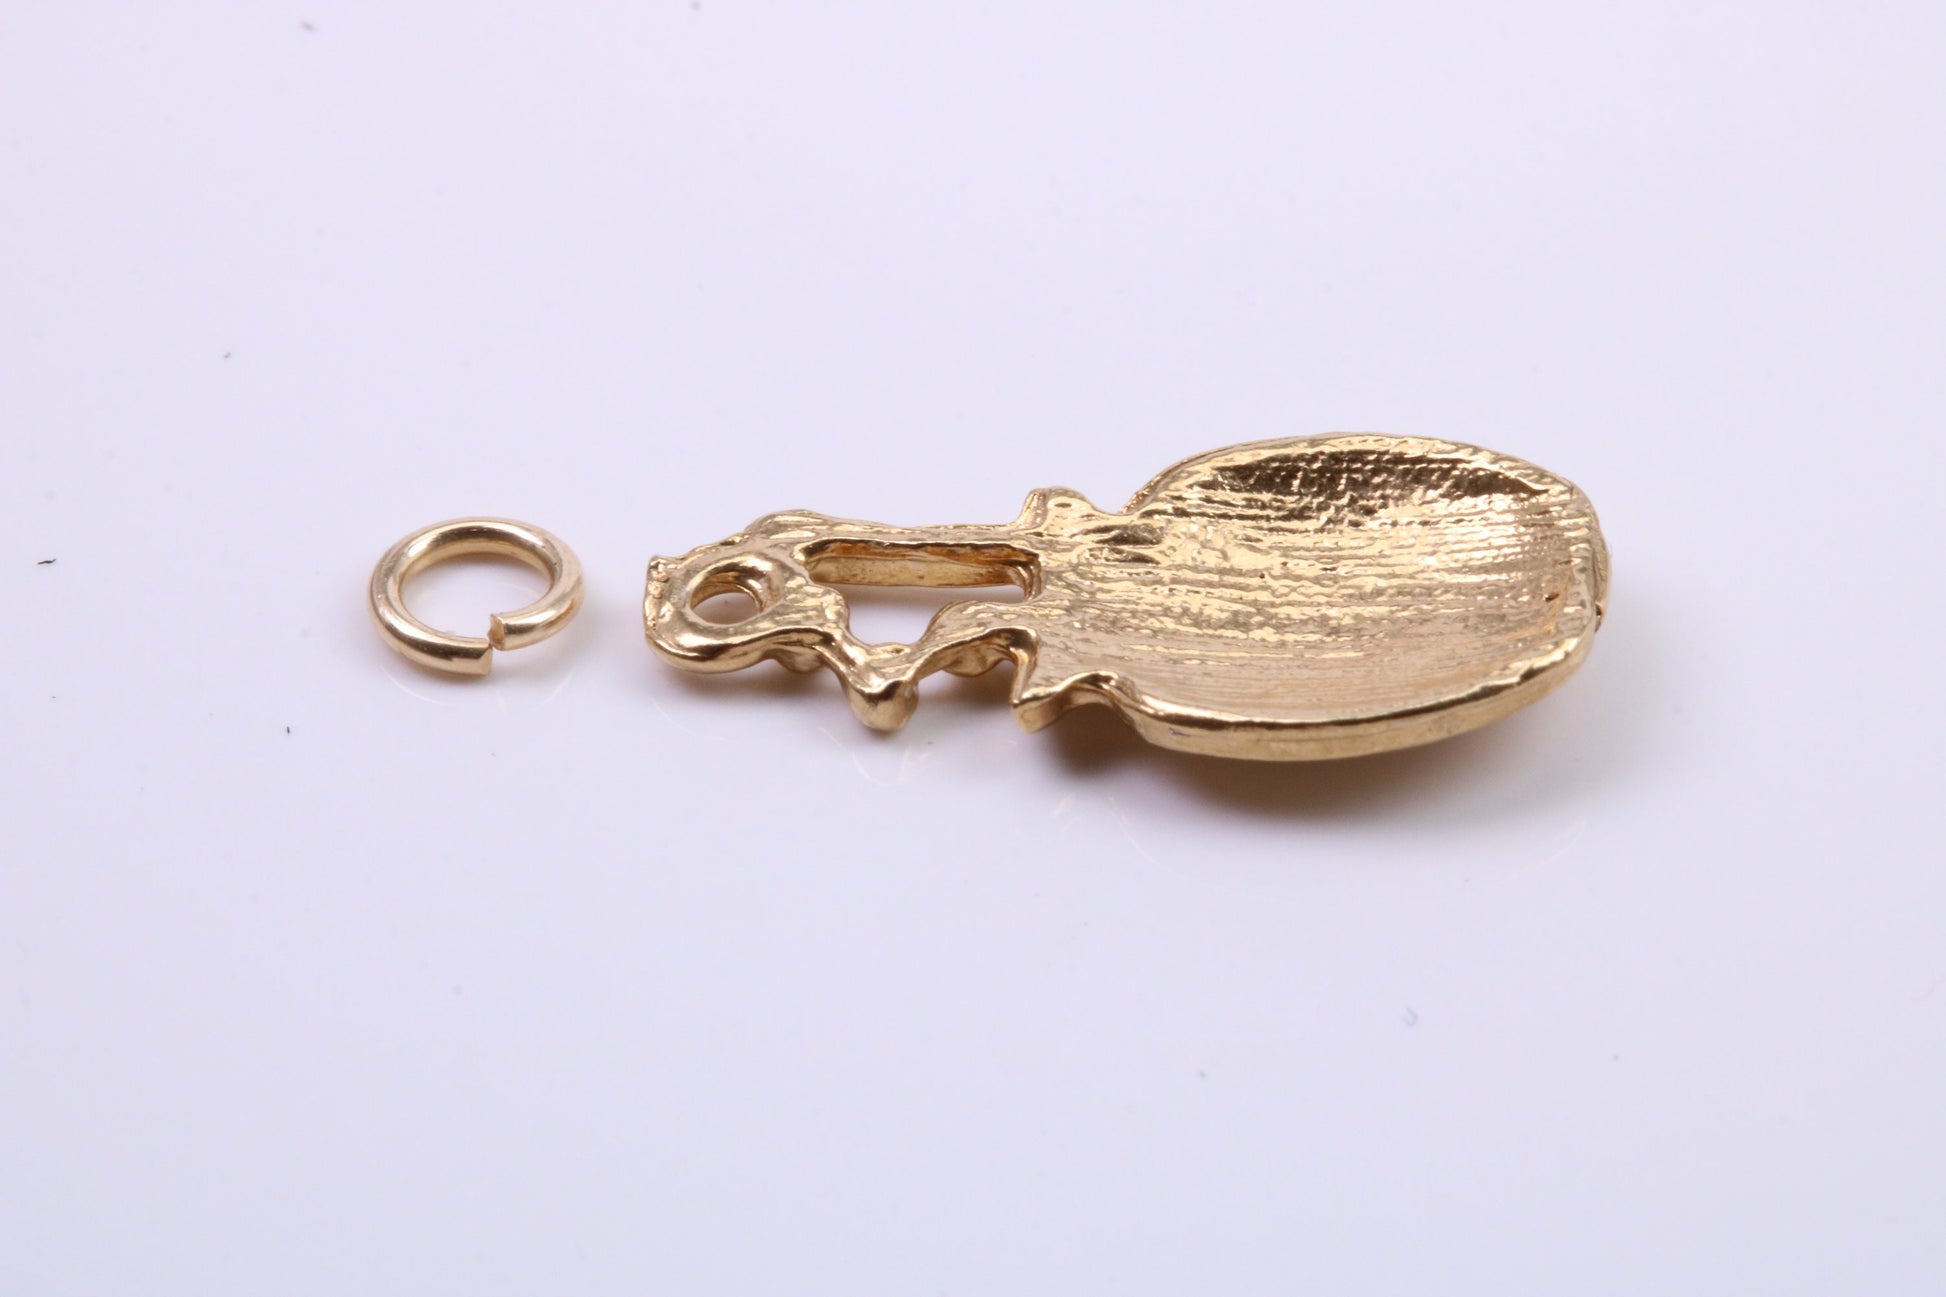 Cooking Pot Charm, Traditional Charm, Made from Solid 9ct Yellow Gold, British Hallmarked, Complete with Attachment Link